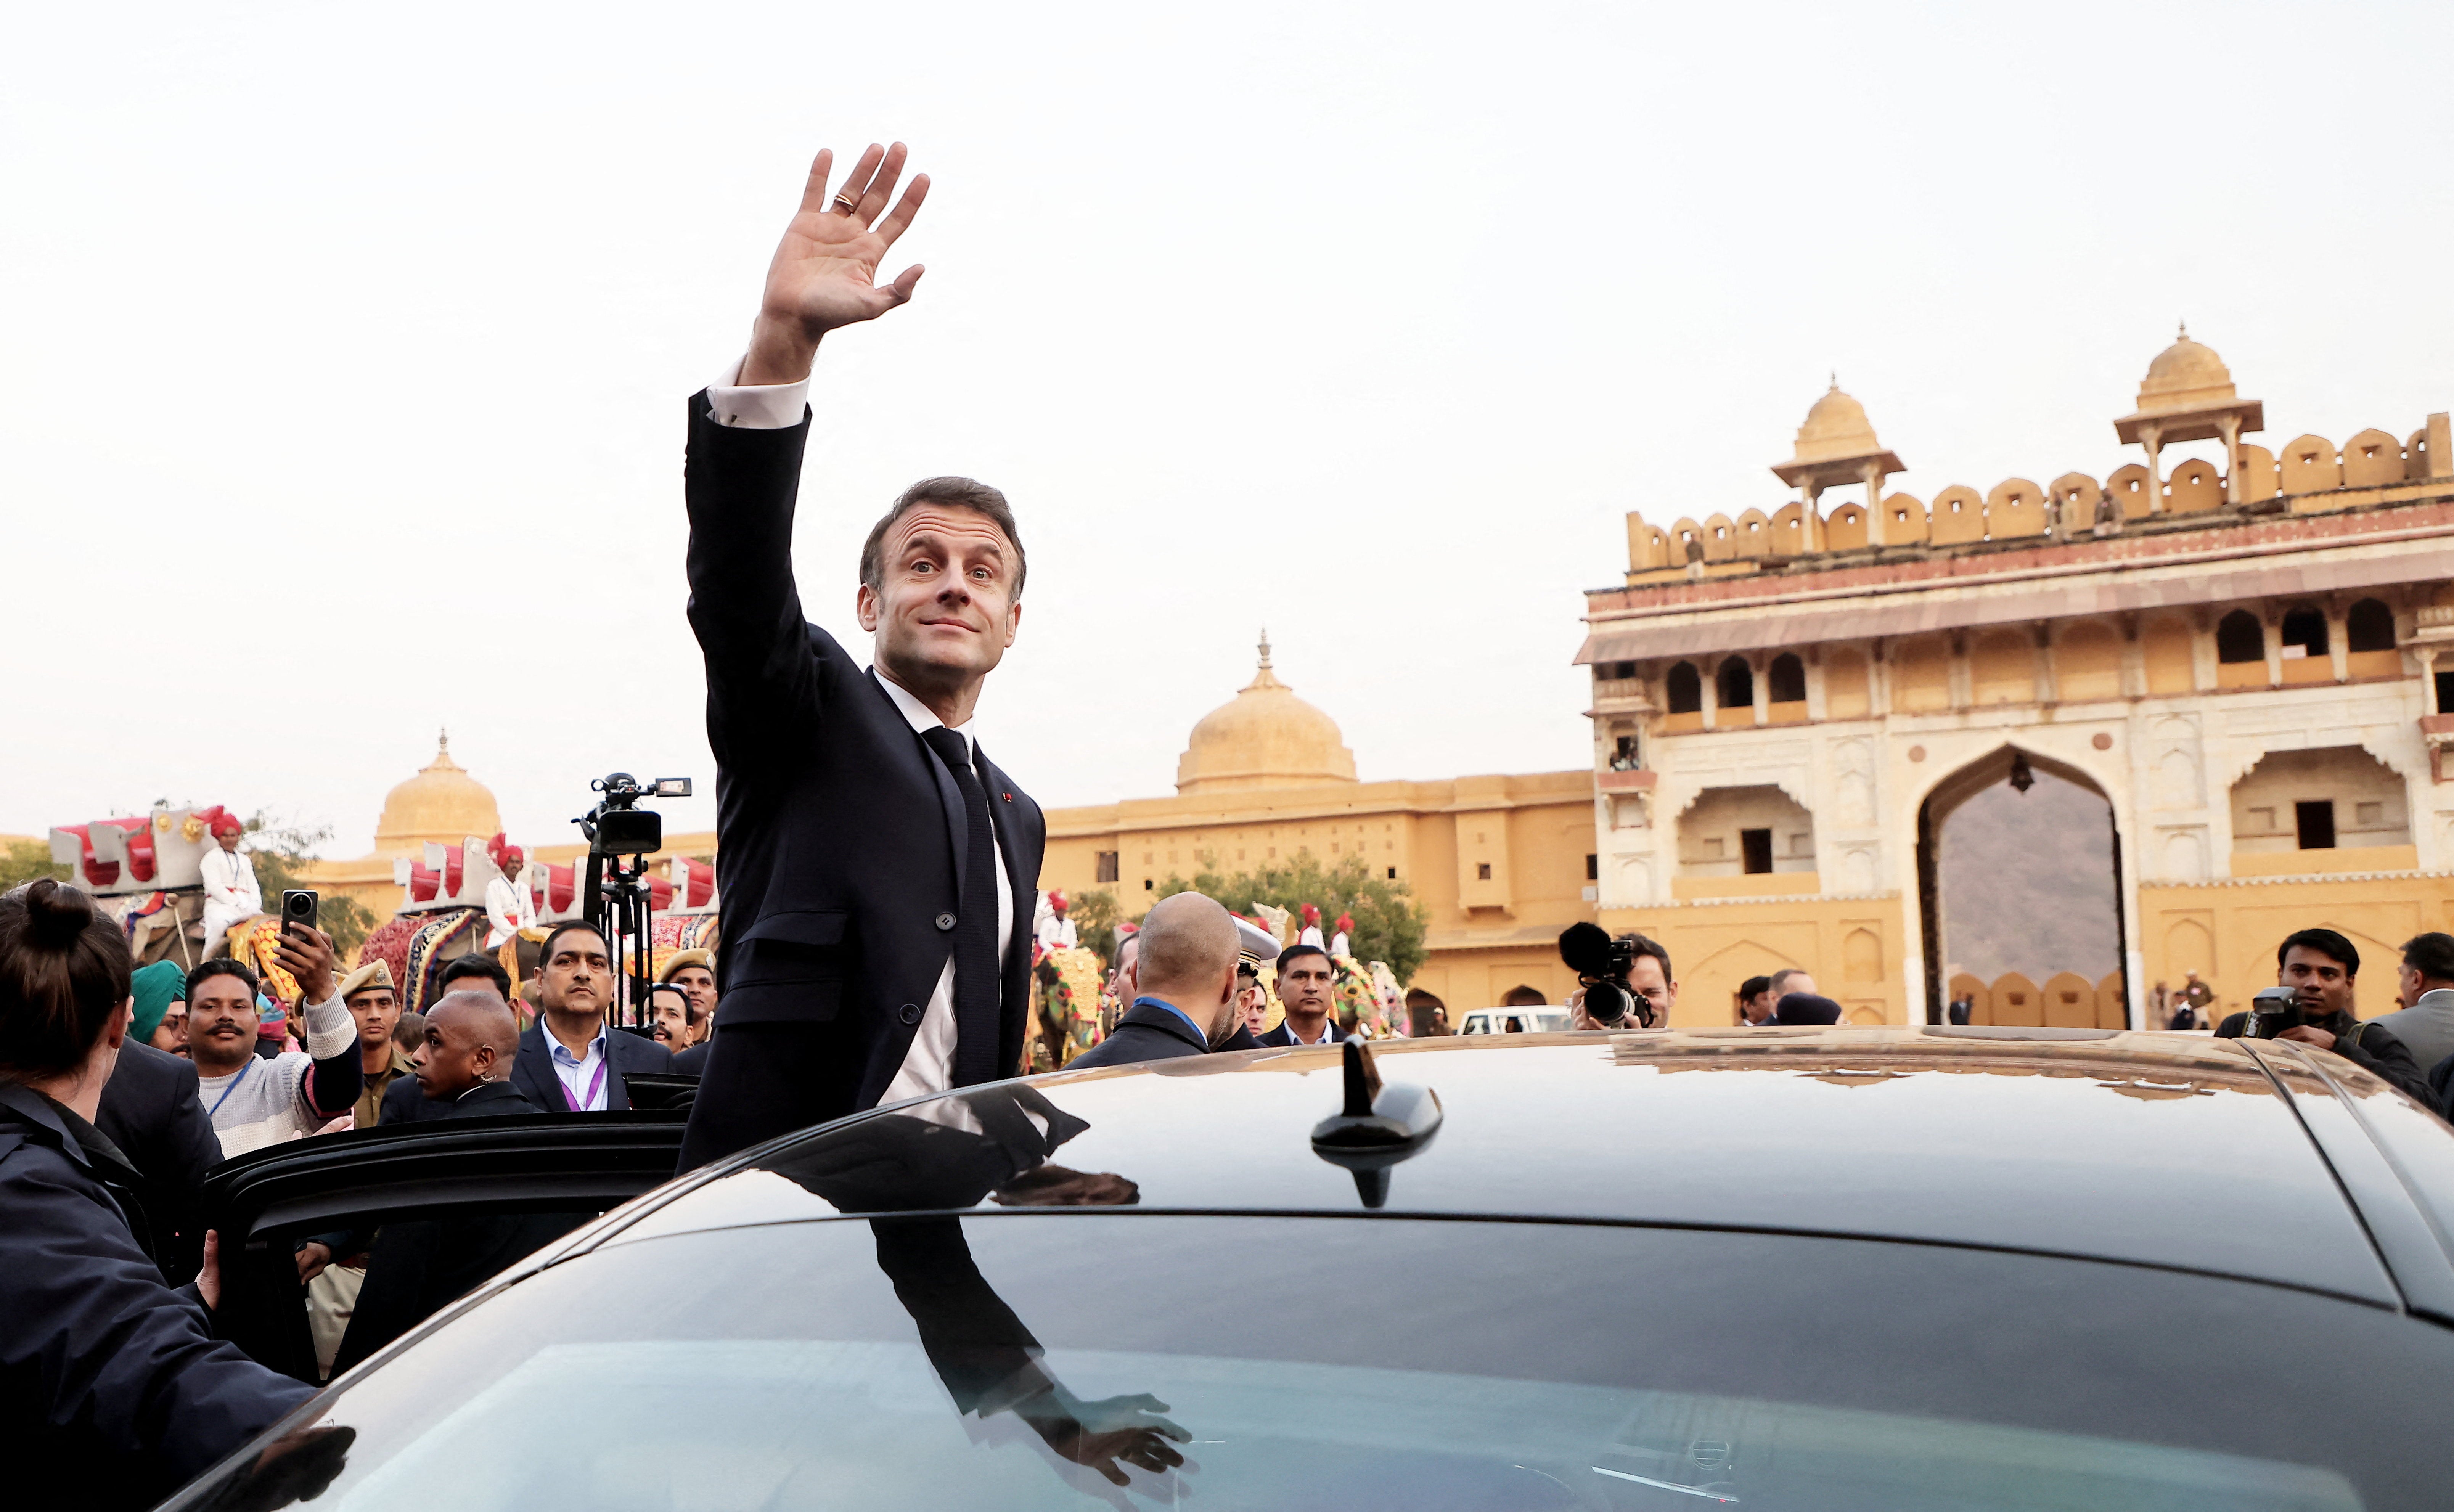 French President Emmanuel Macron waves as he attends a welcoming ceremony at Amber Fort in Jaipur